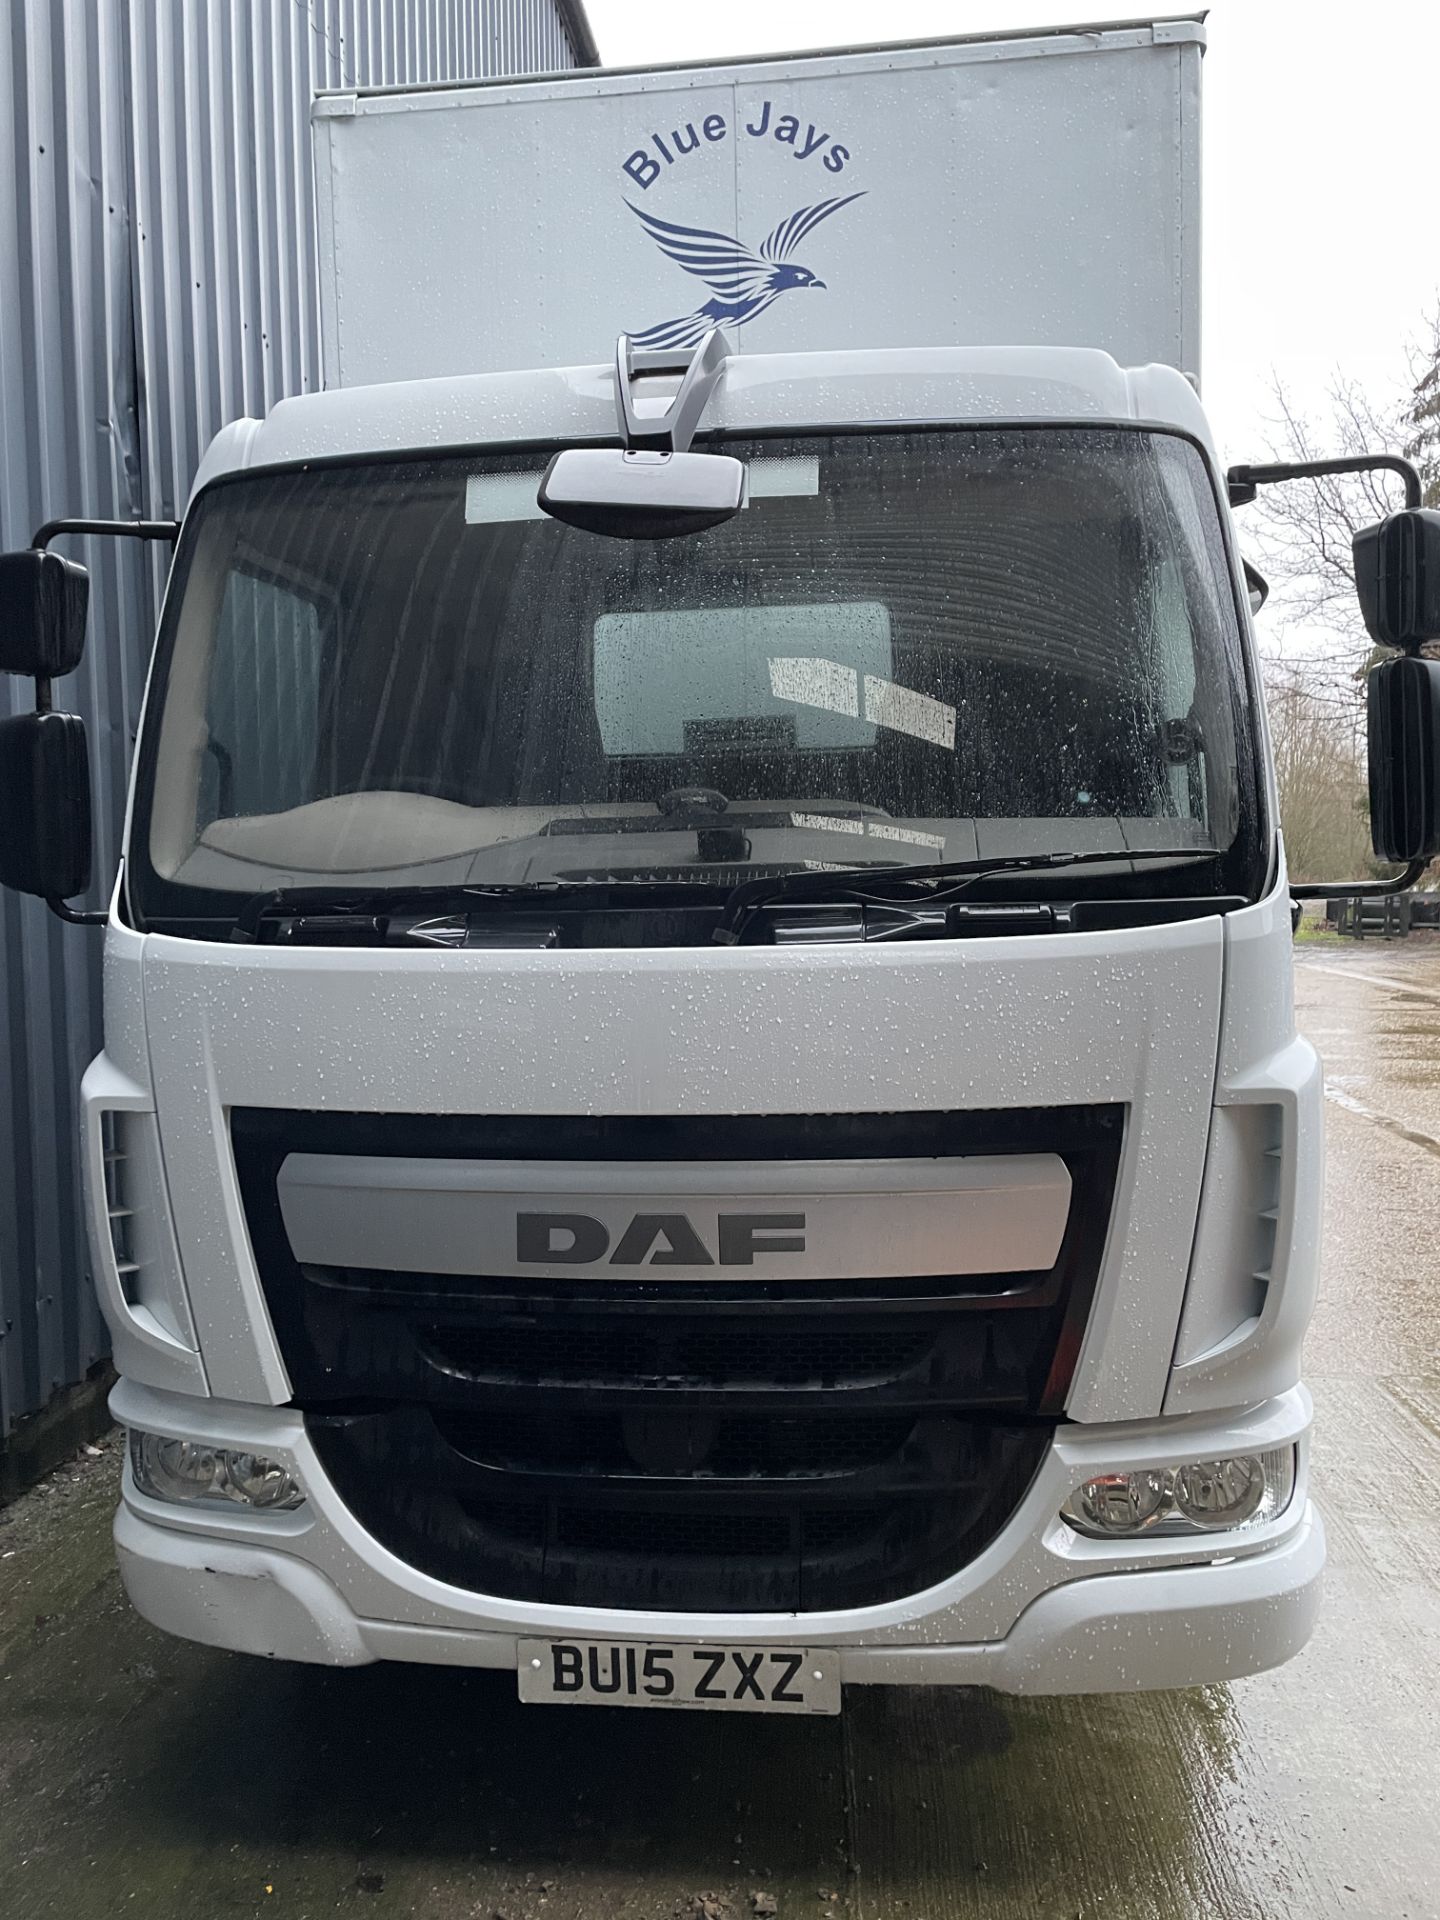 DAF FA LF.180 12t Euro 6 Extended Day Box Lorry, Registration BU15 ZXZ, First Registered 20th May 20 - Image 2 of 18